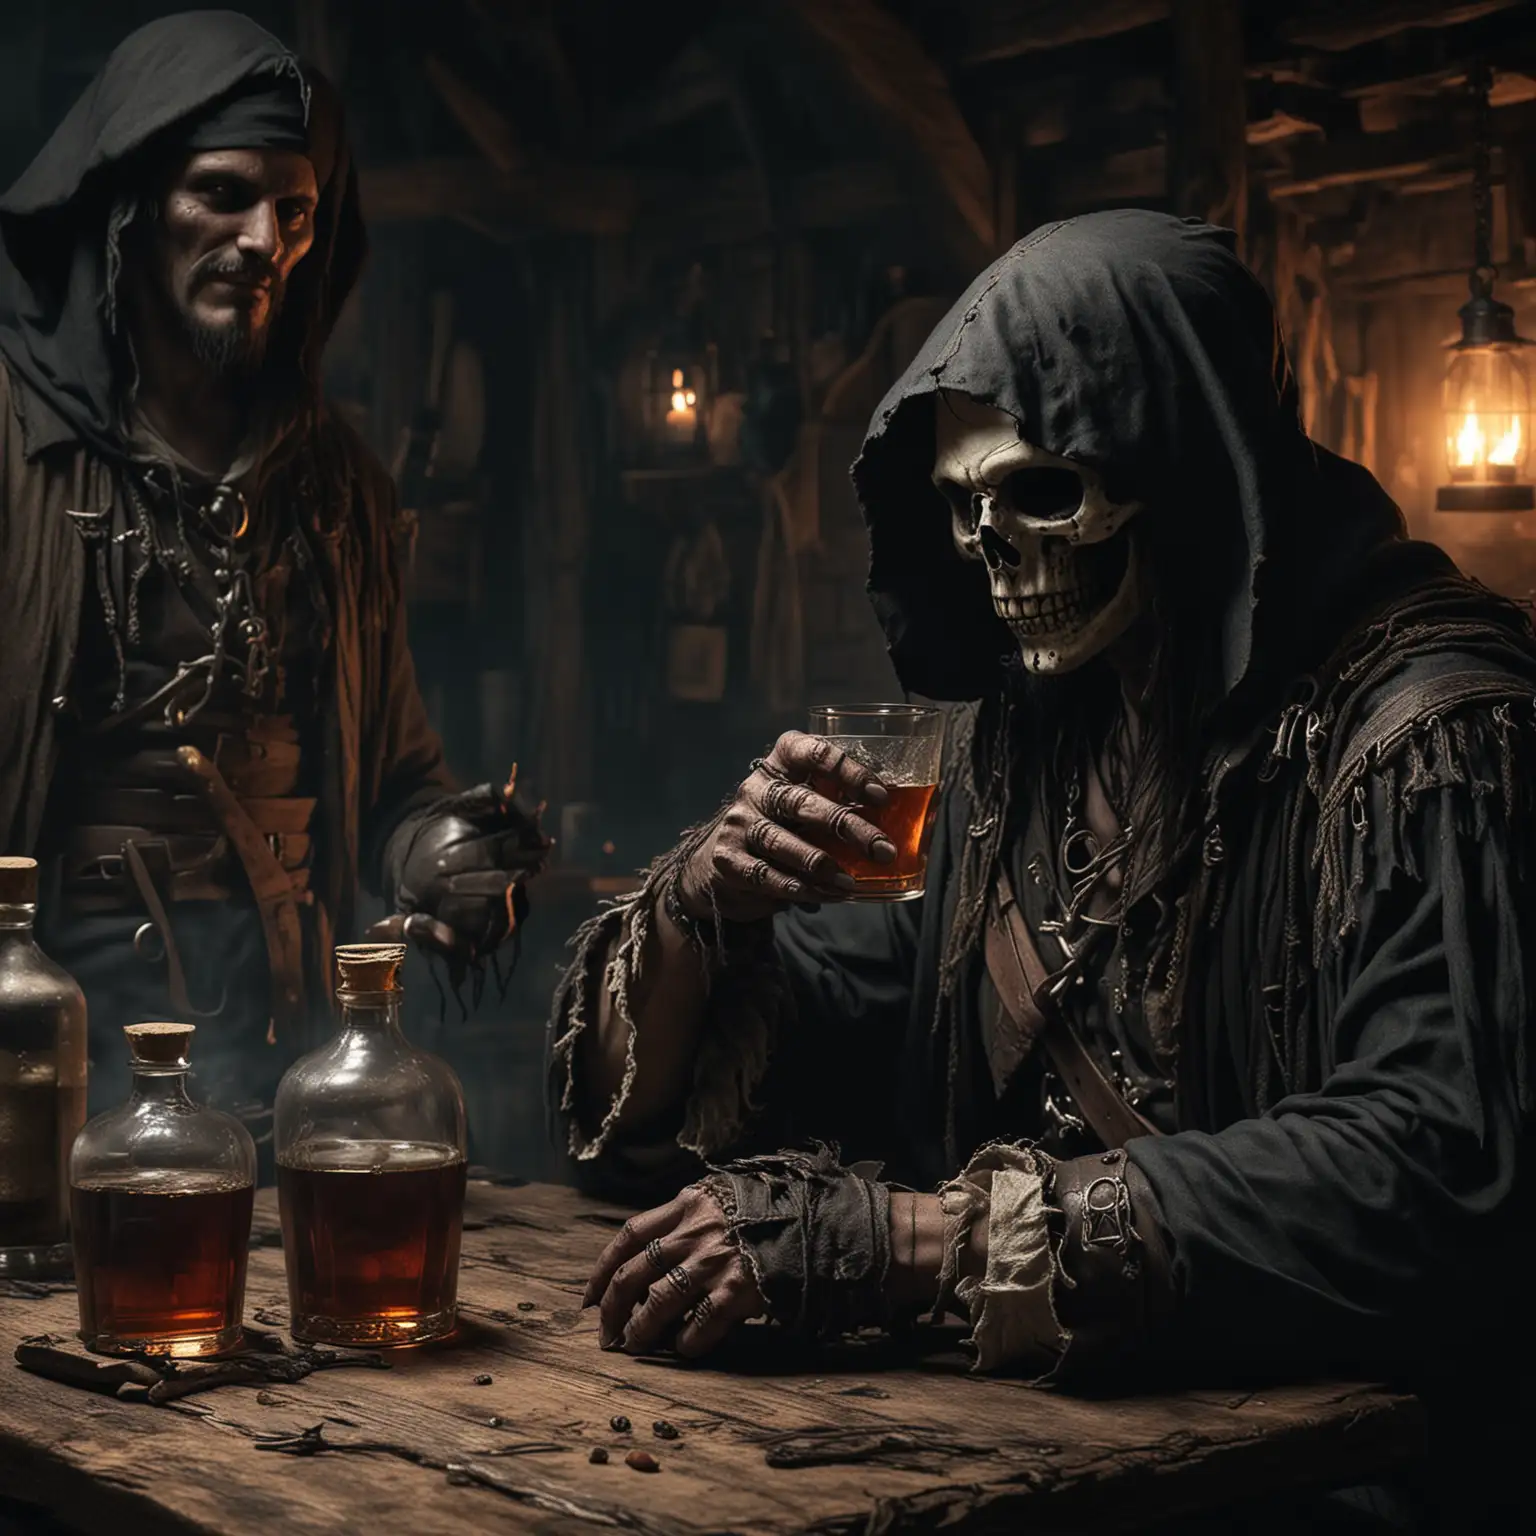 Medieval Tavern Scene Pirate and Grim Reaper Enjoying Rum Together